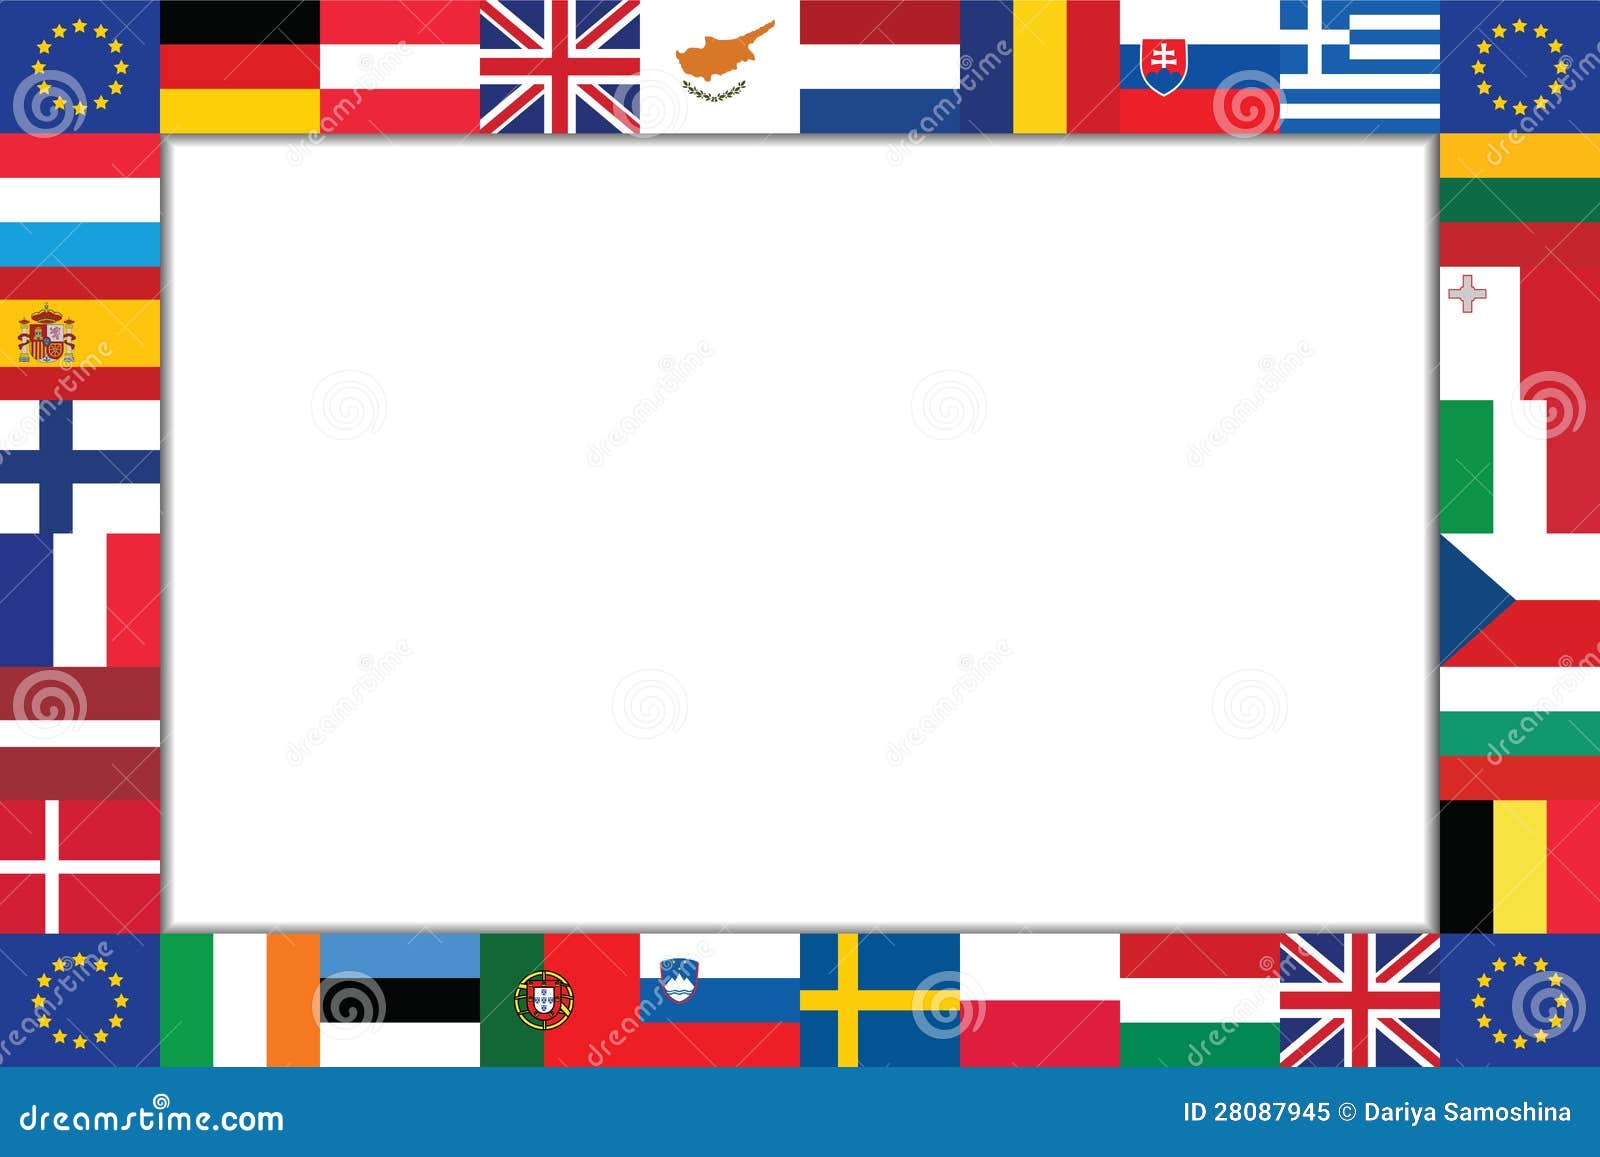 clip art flags nations - photo #41